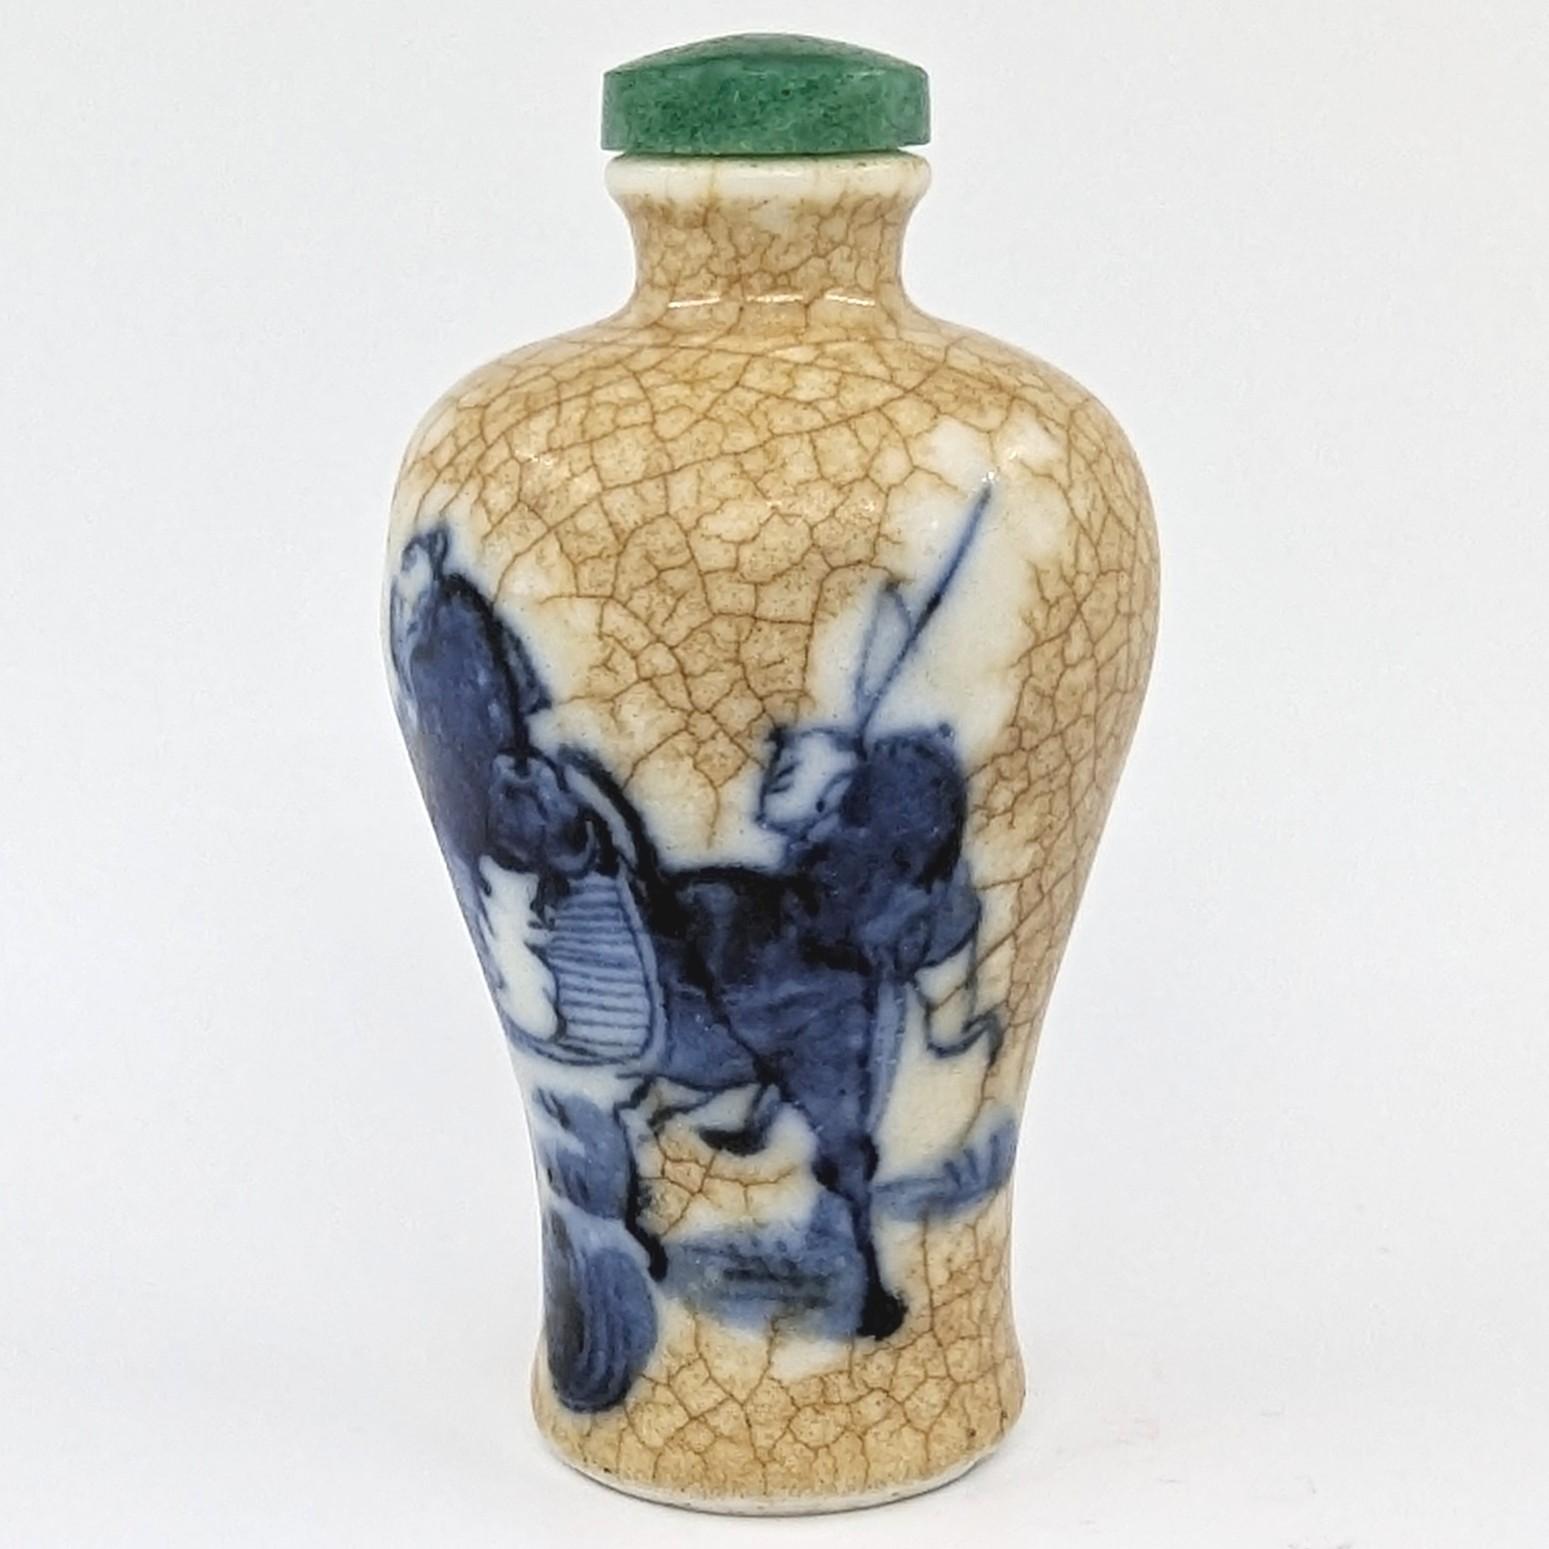 Antique Chinese porcelain snuff bottle in meiping form, painted in underglaze blue and white of a winter scene with a donkey riding scholar and an attendant, on crackle glaze including within the footring, with a green jade stopper and wooden